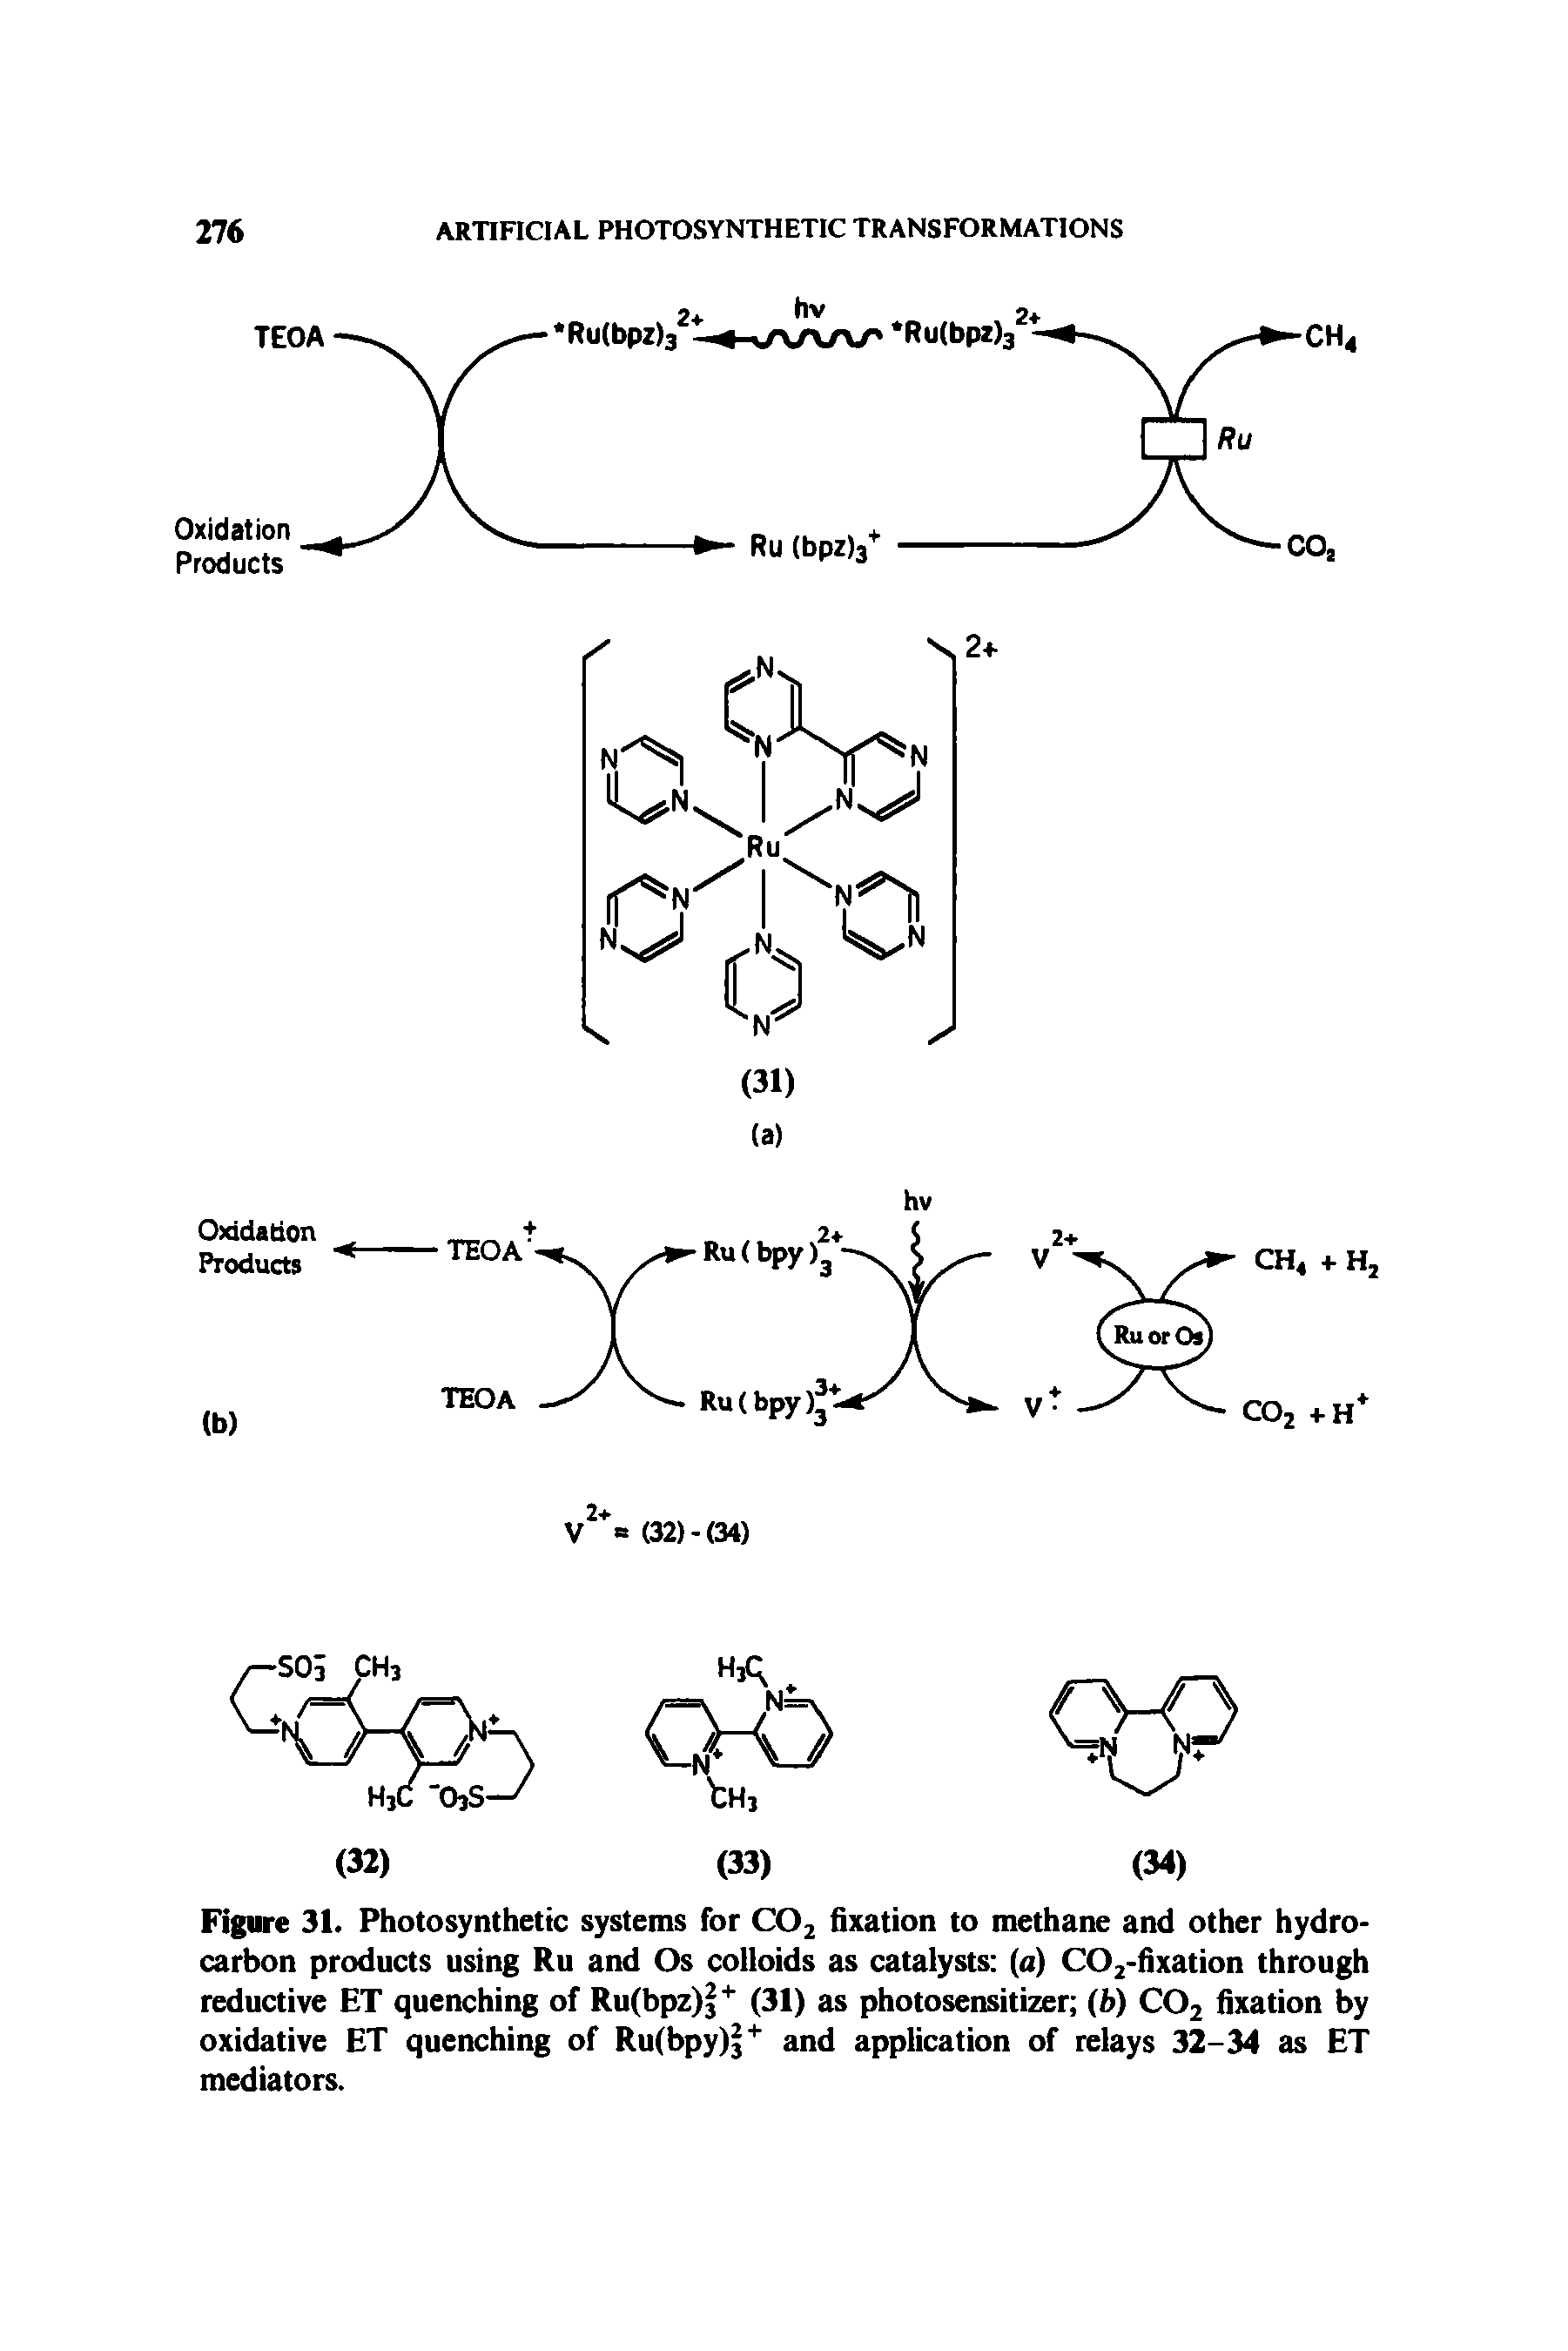 Figure 31. Photosynthetic systems for CO2 fixation to methane and other hydrocarbon products using Ru and Os colloids as catalysts (a) C02-fixation through reductive ET quenching of Ru(bpz)j (31) as photosensitizer (b) CO2 fixation by oxidative ET quenching of Ru(bpy)j and application of relays 32-34 as ET mediators.